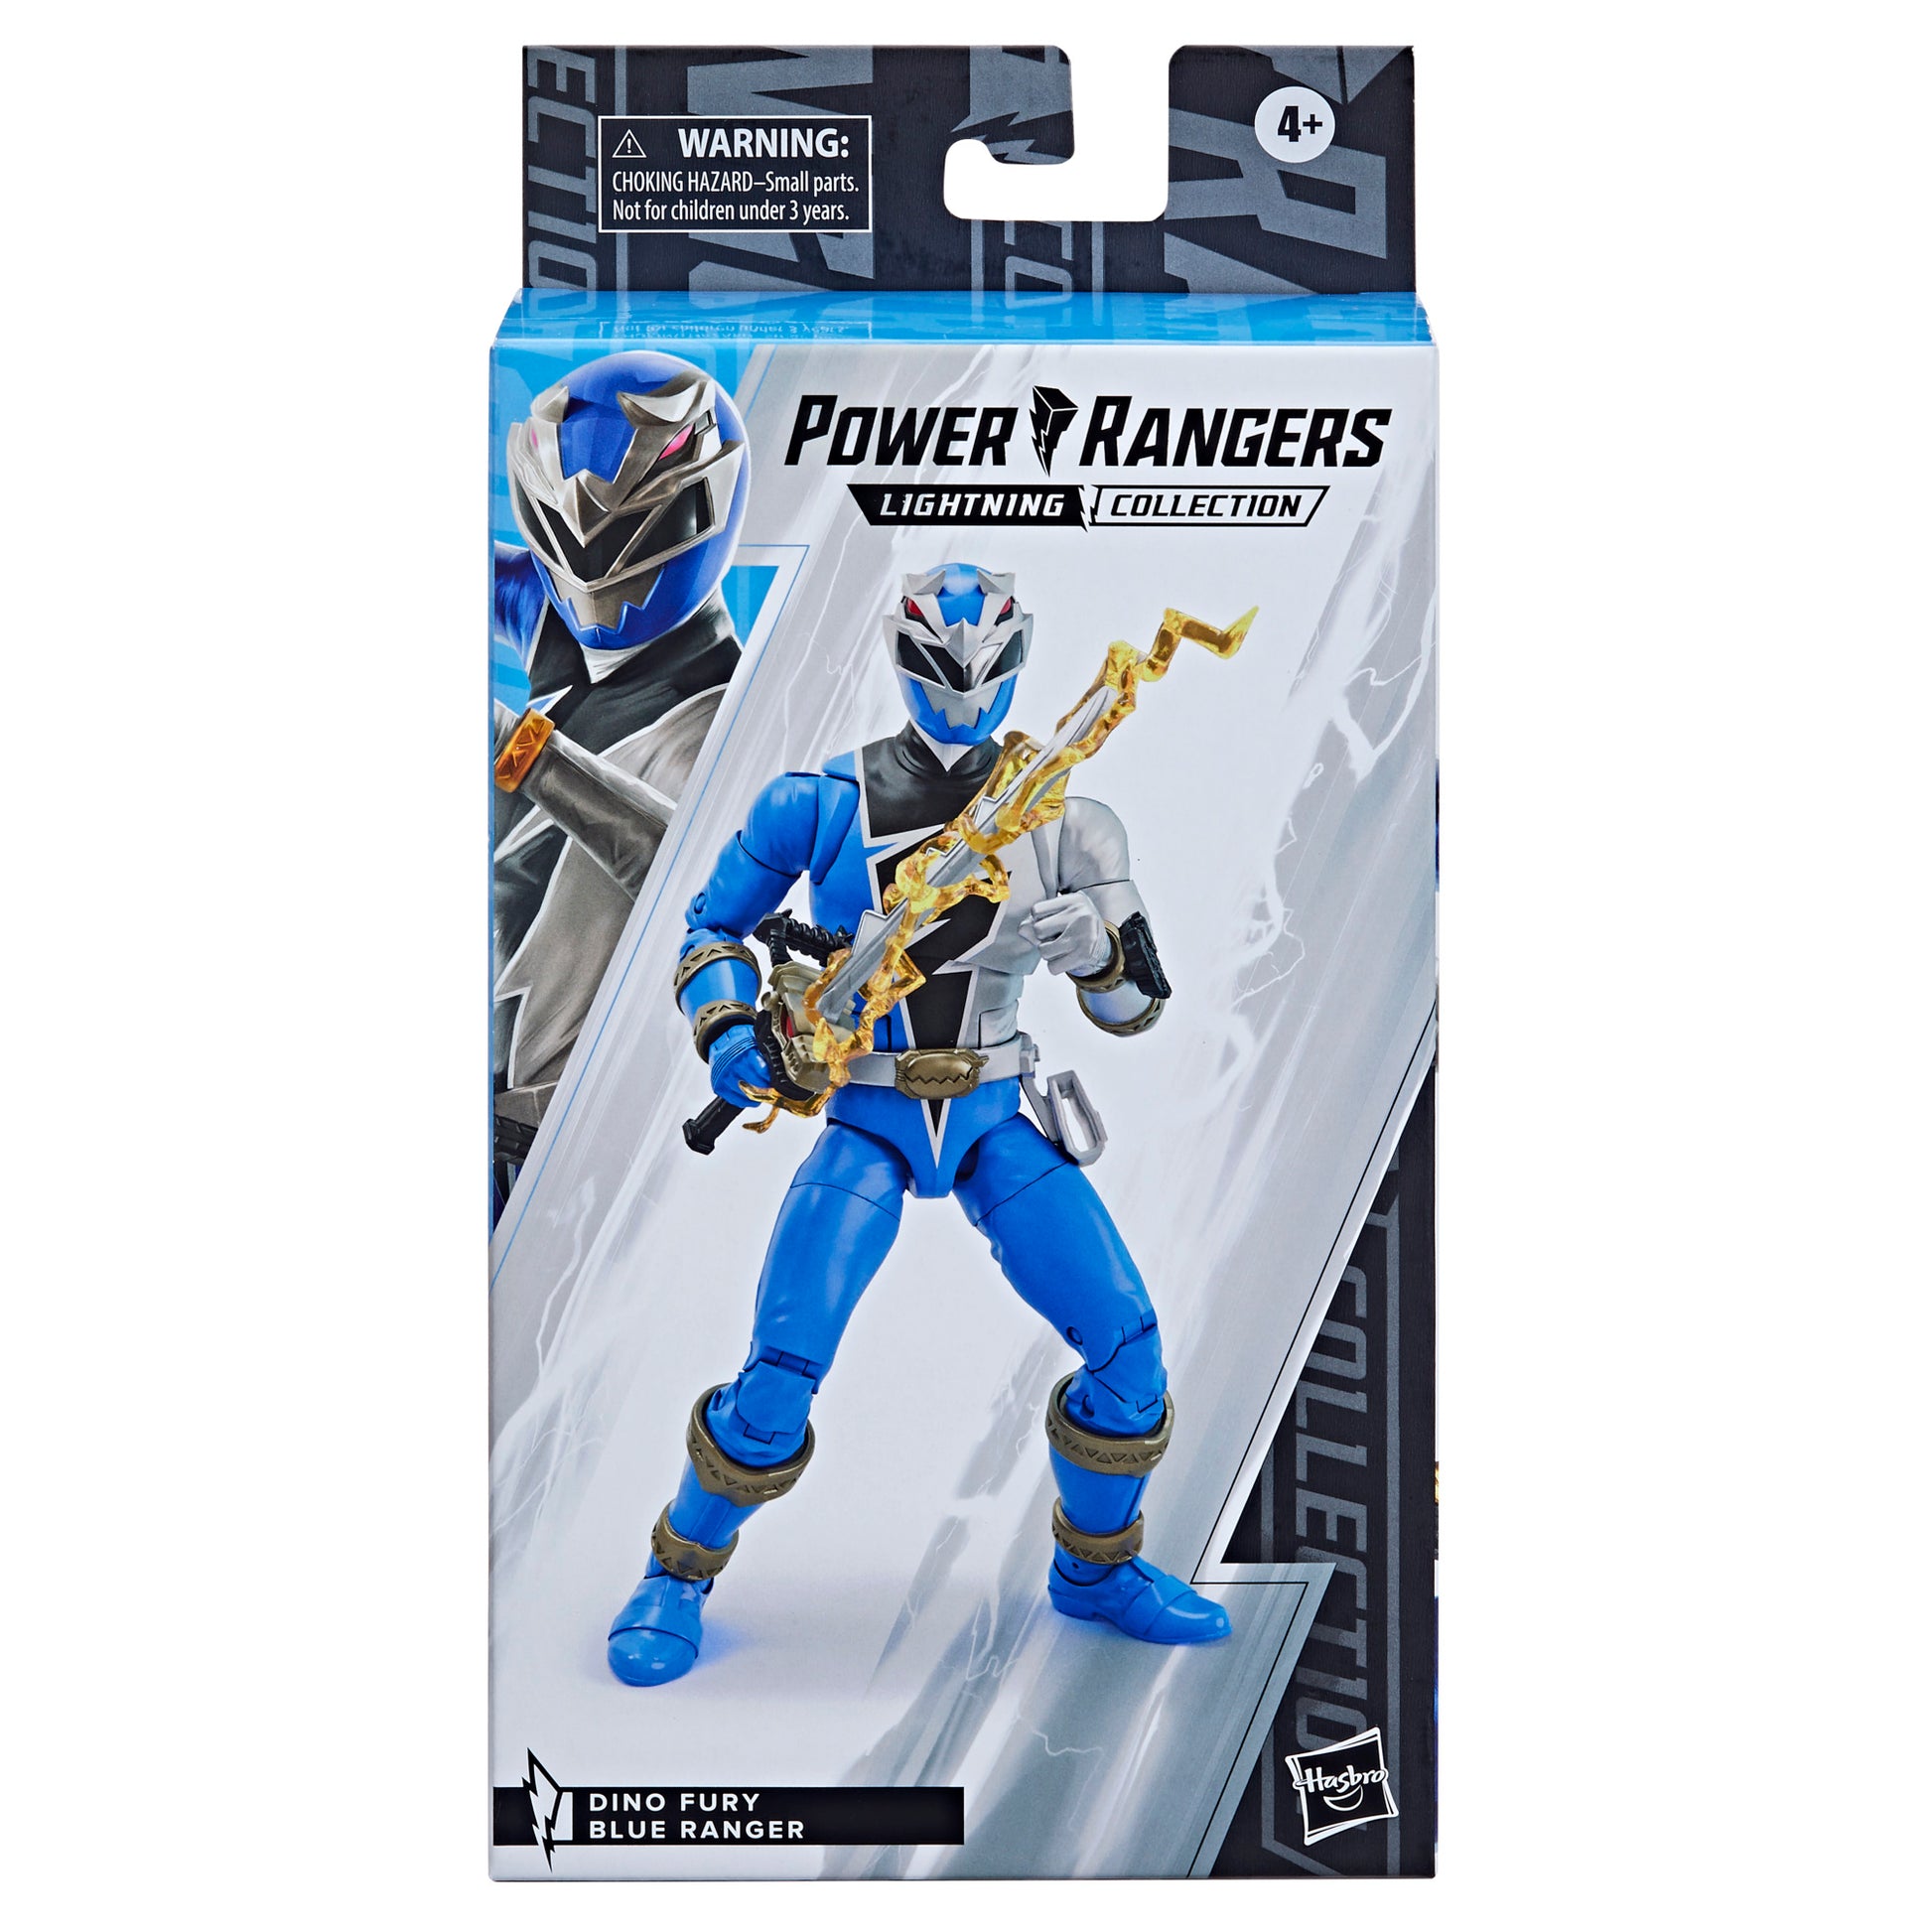 Power Rangers Lightning Collection Dino Fury Blue Ranger Figure in a box - Heretoserveyou